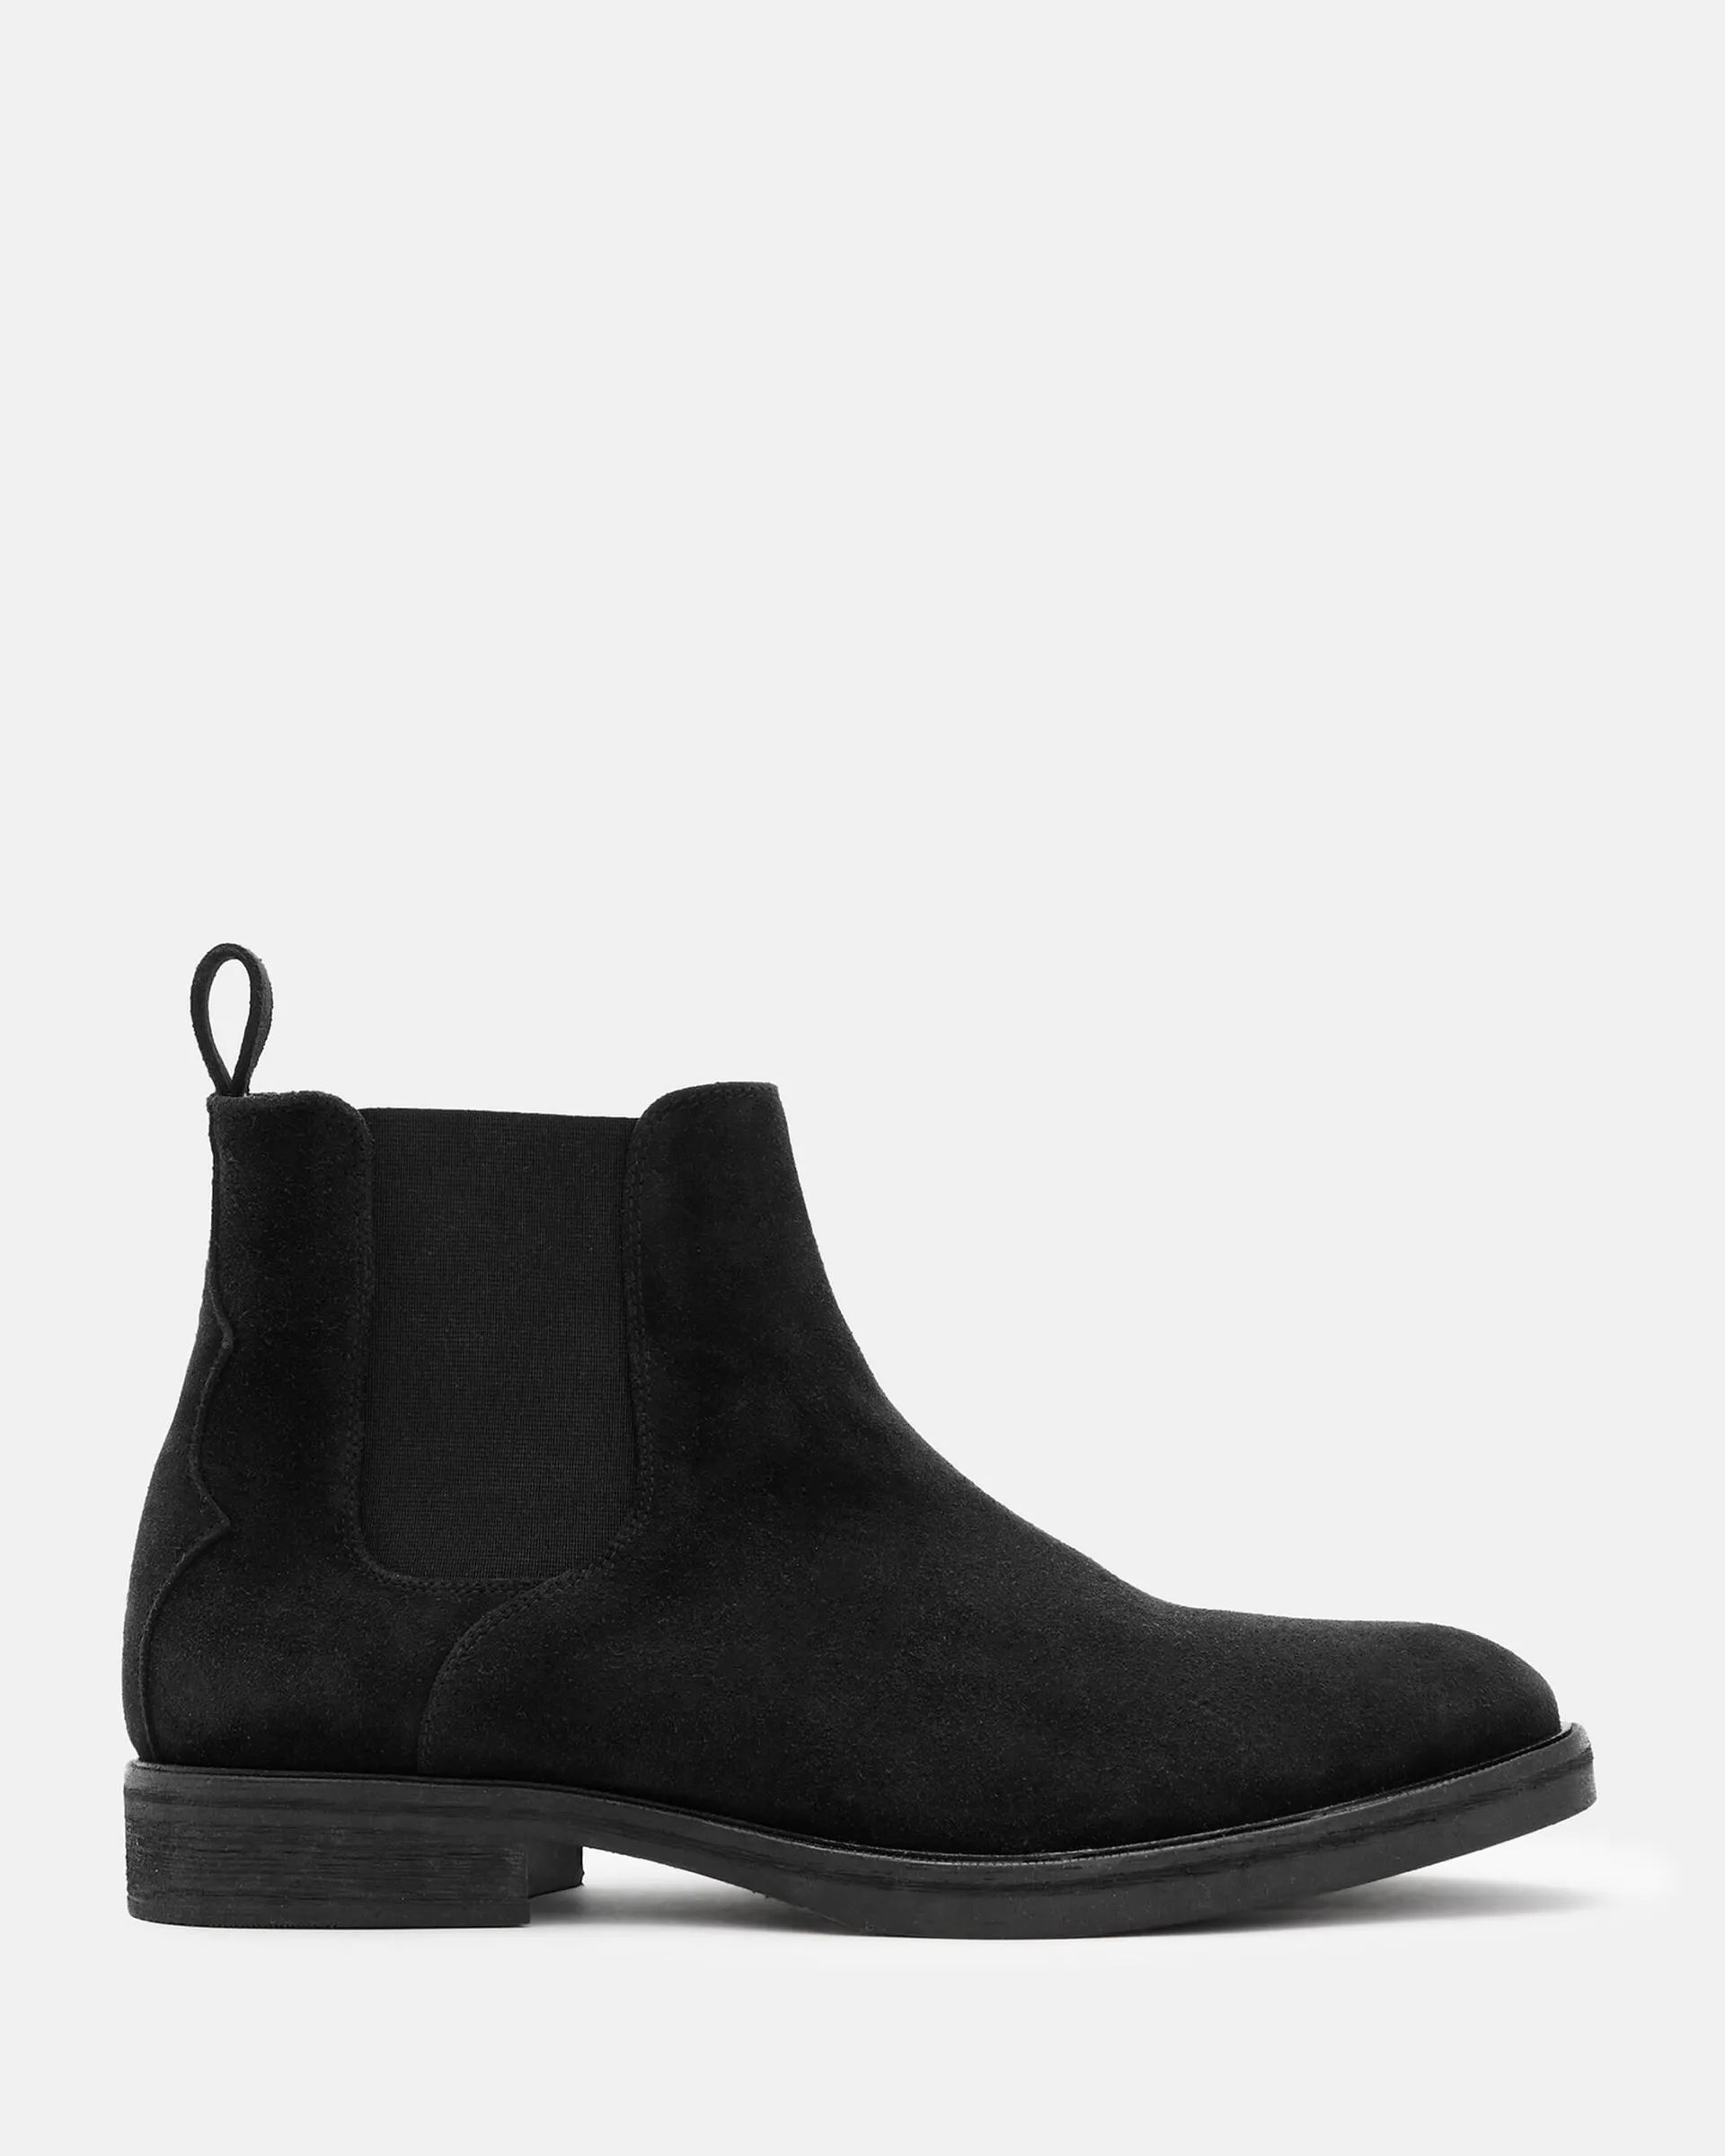 Creed Suede Chelsea Boots